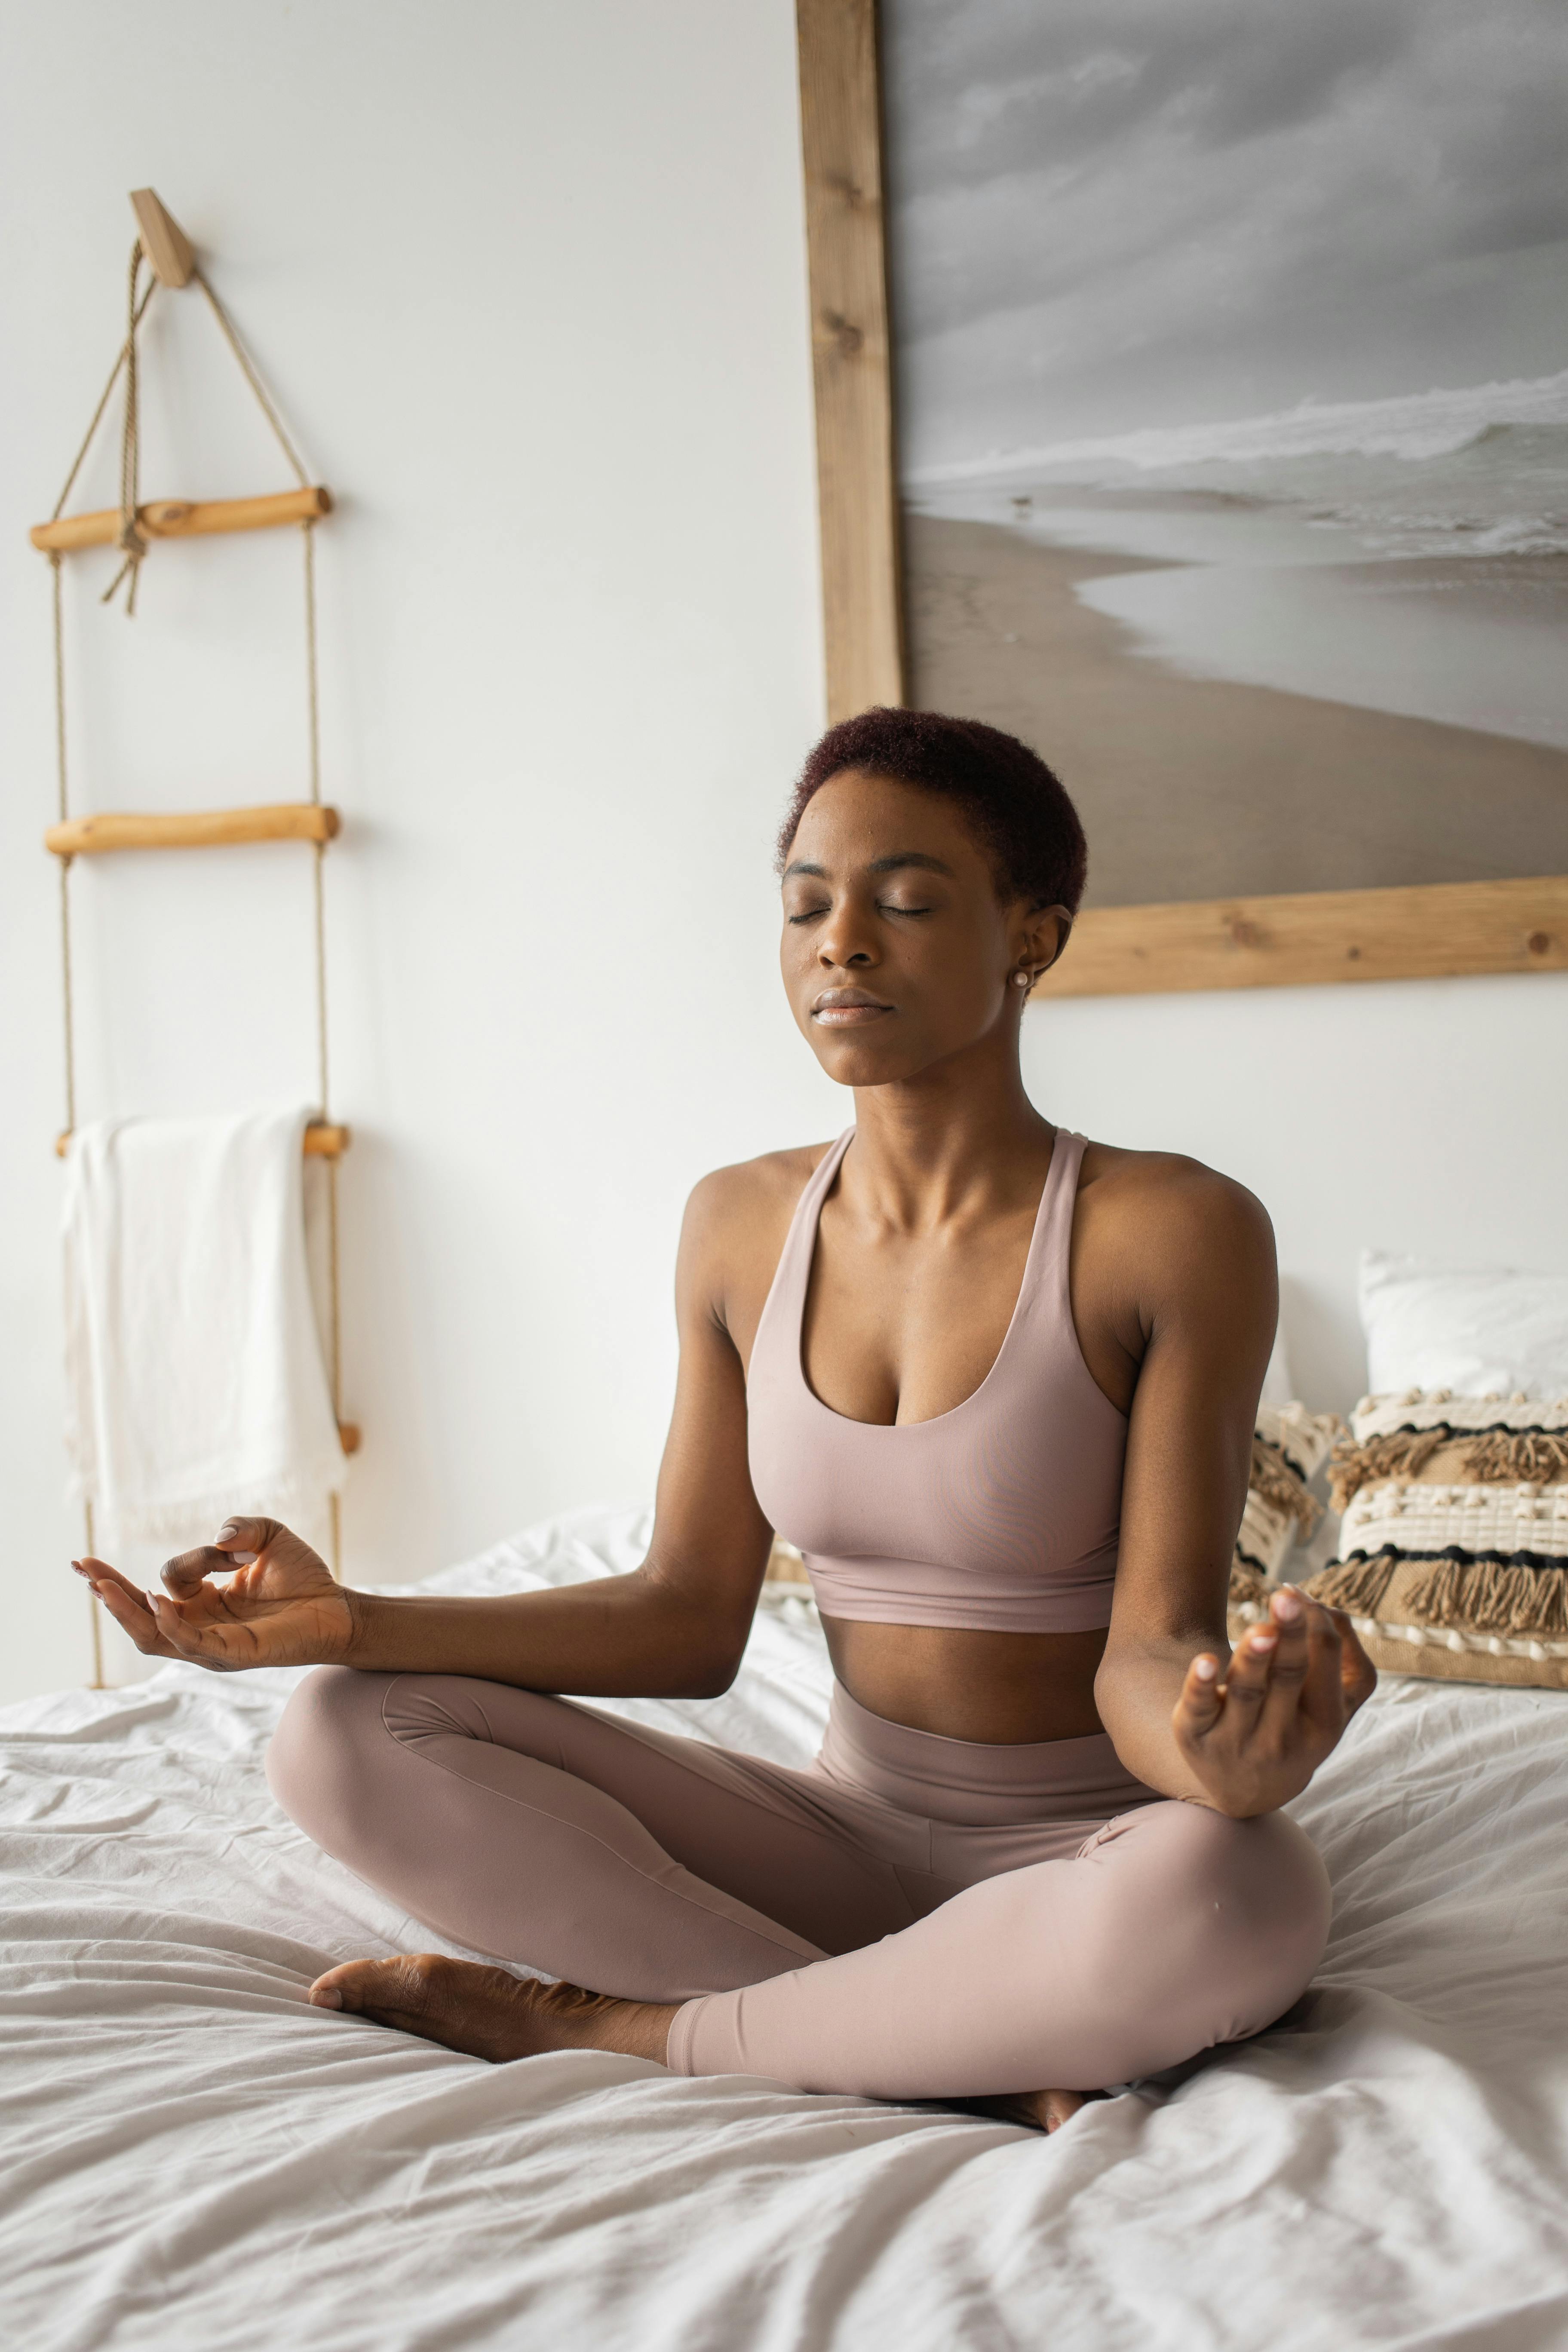 A woman meditating in bed